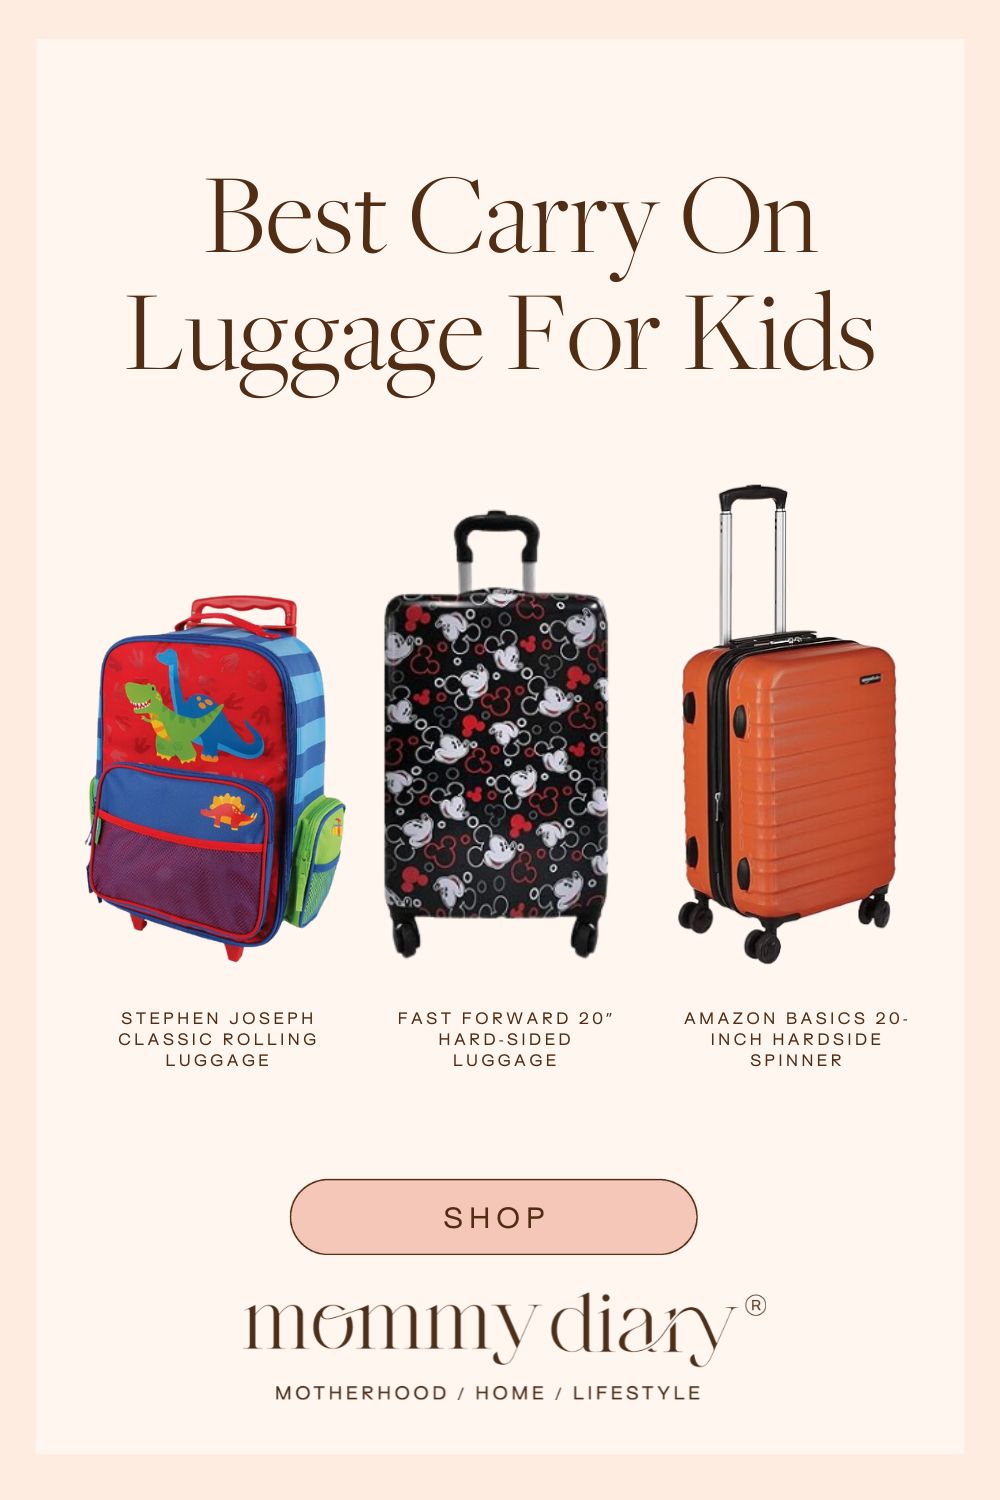 Best Carry On Luggage For Kids